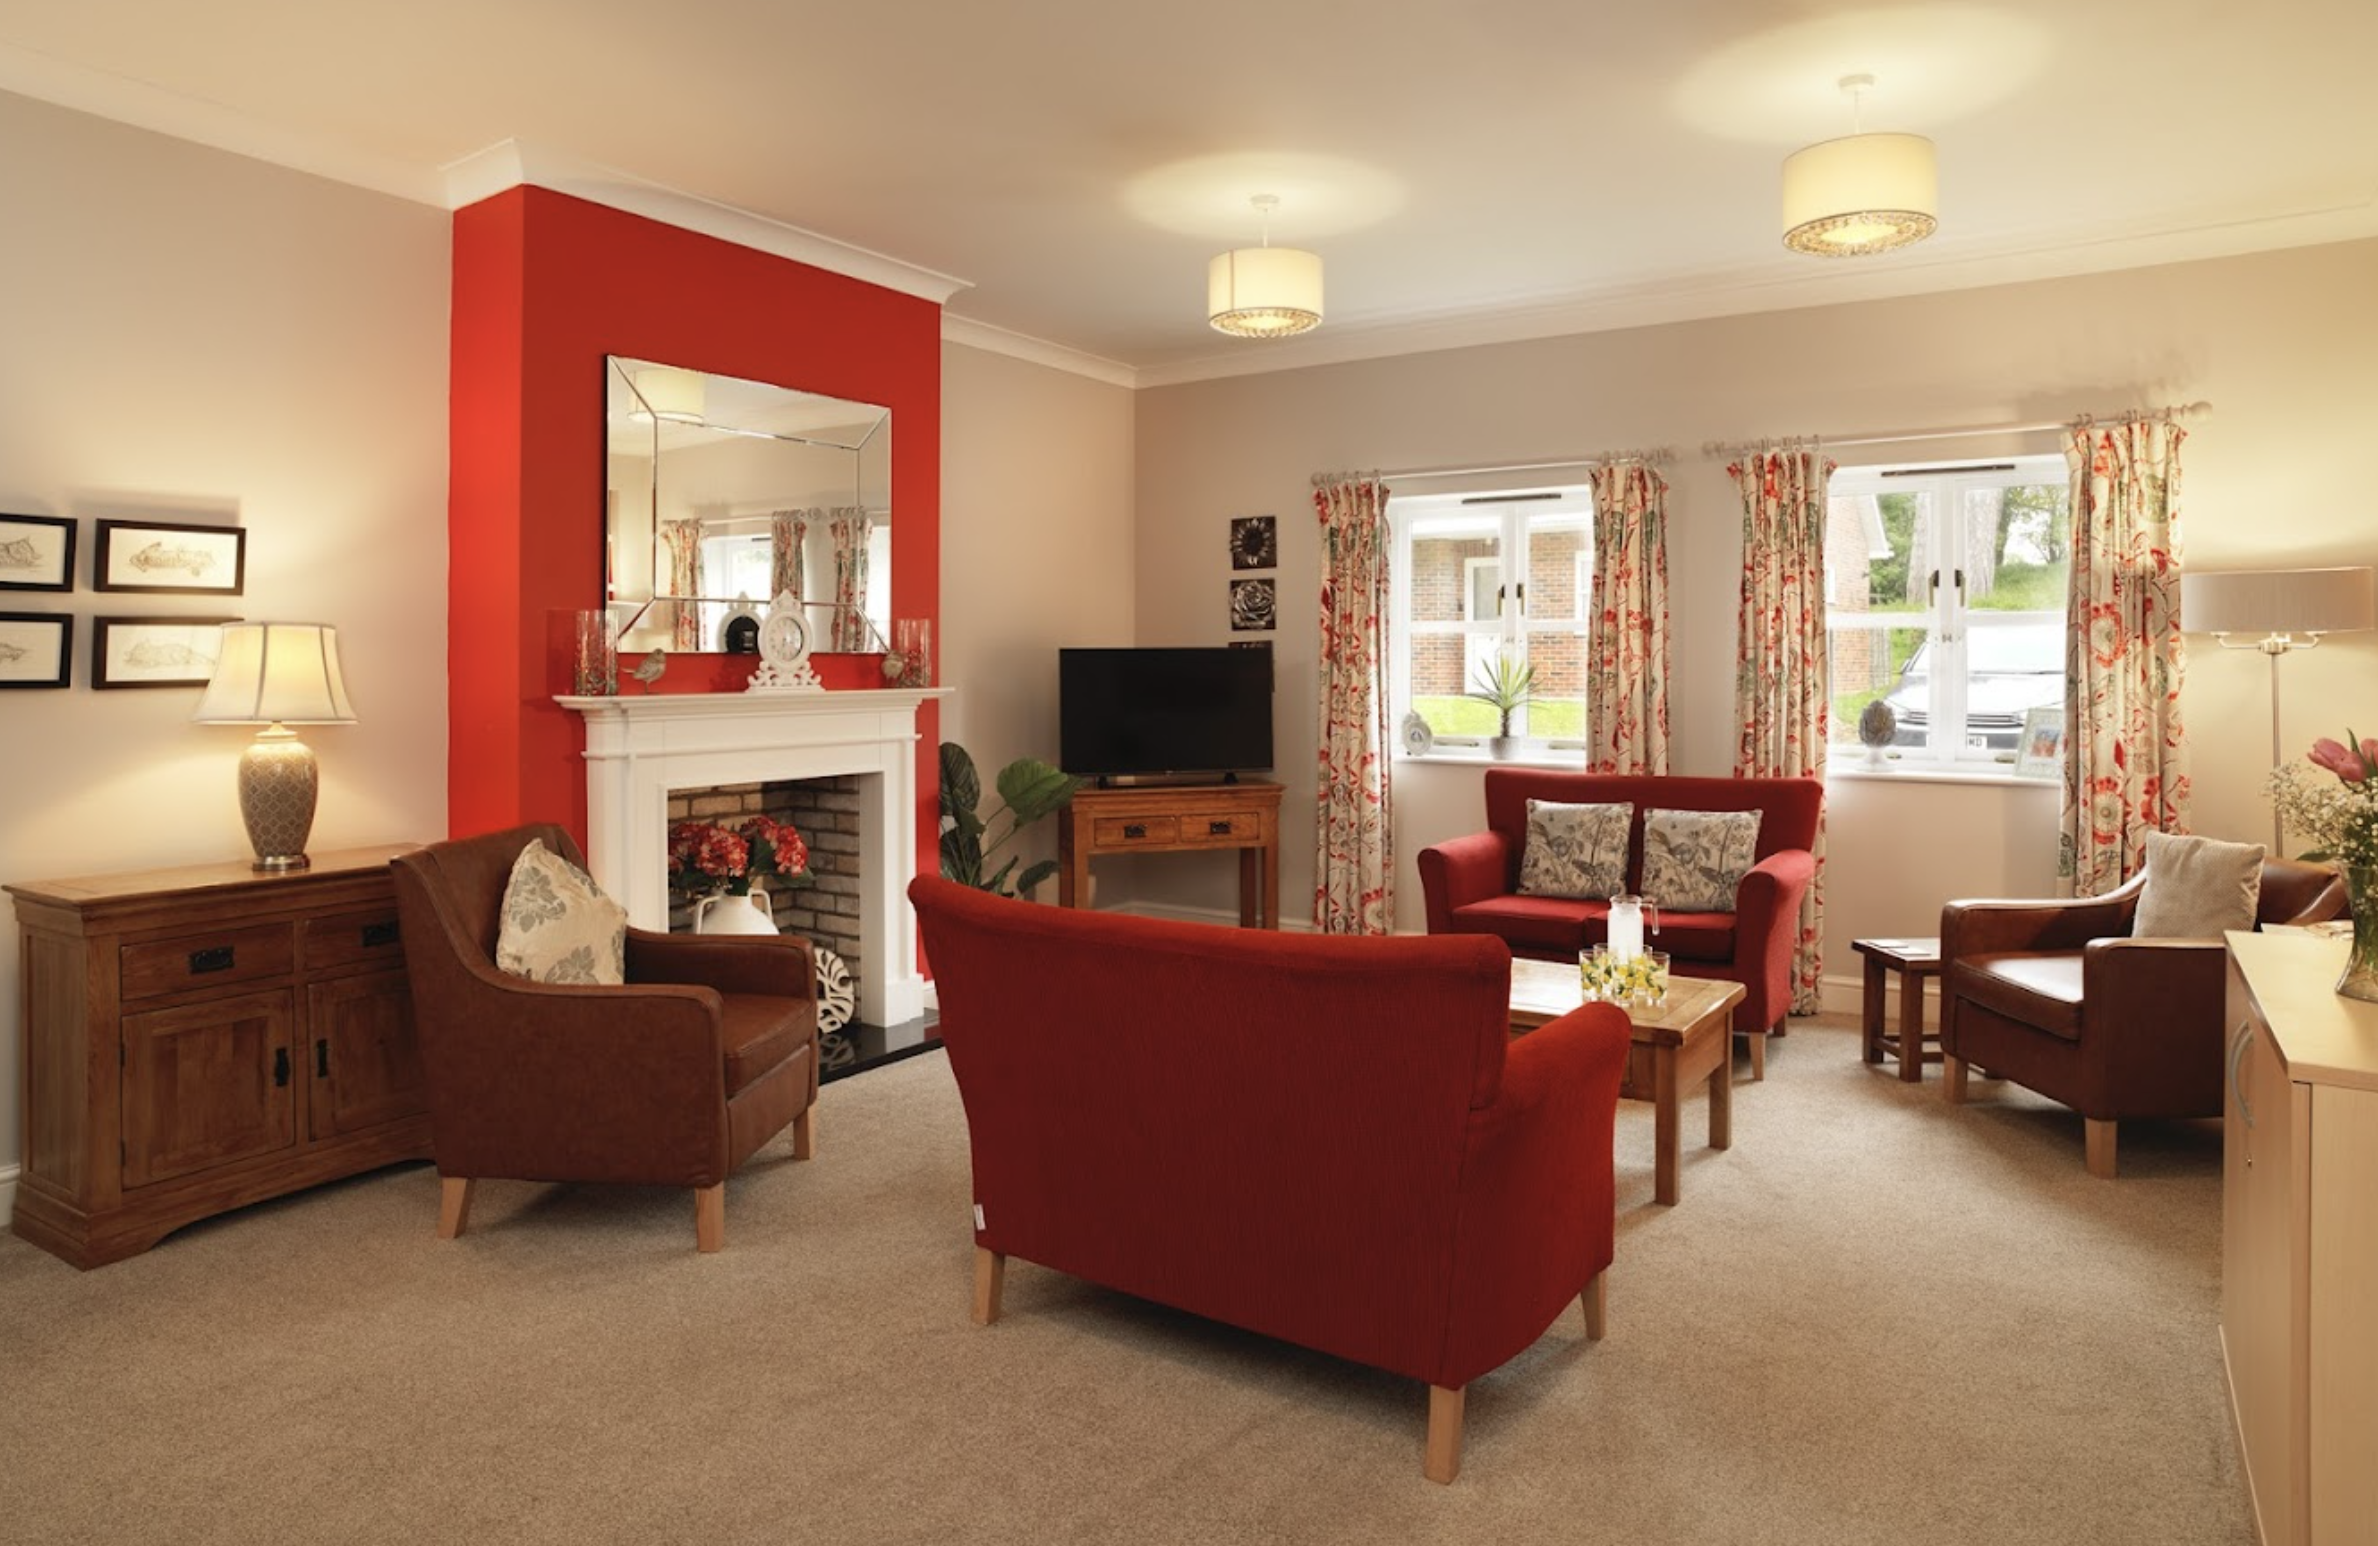 Lounge of Belford House care home in Alton, Hampshire